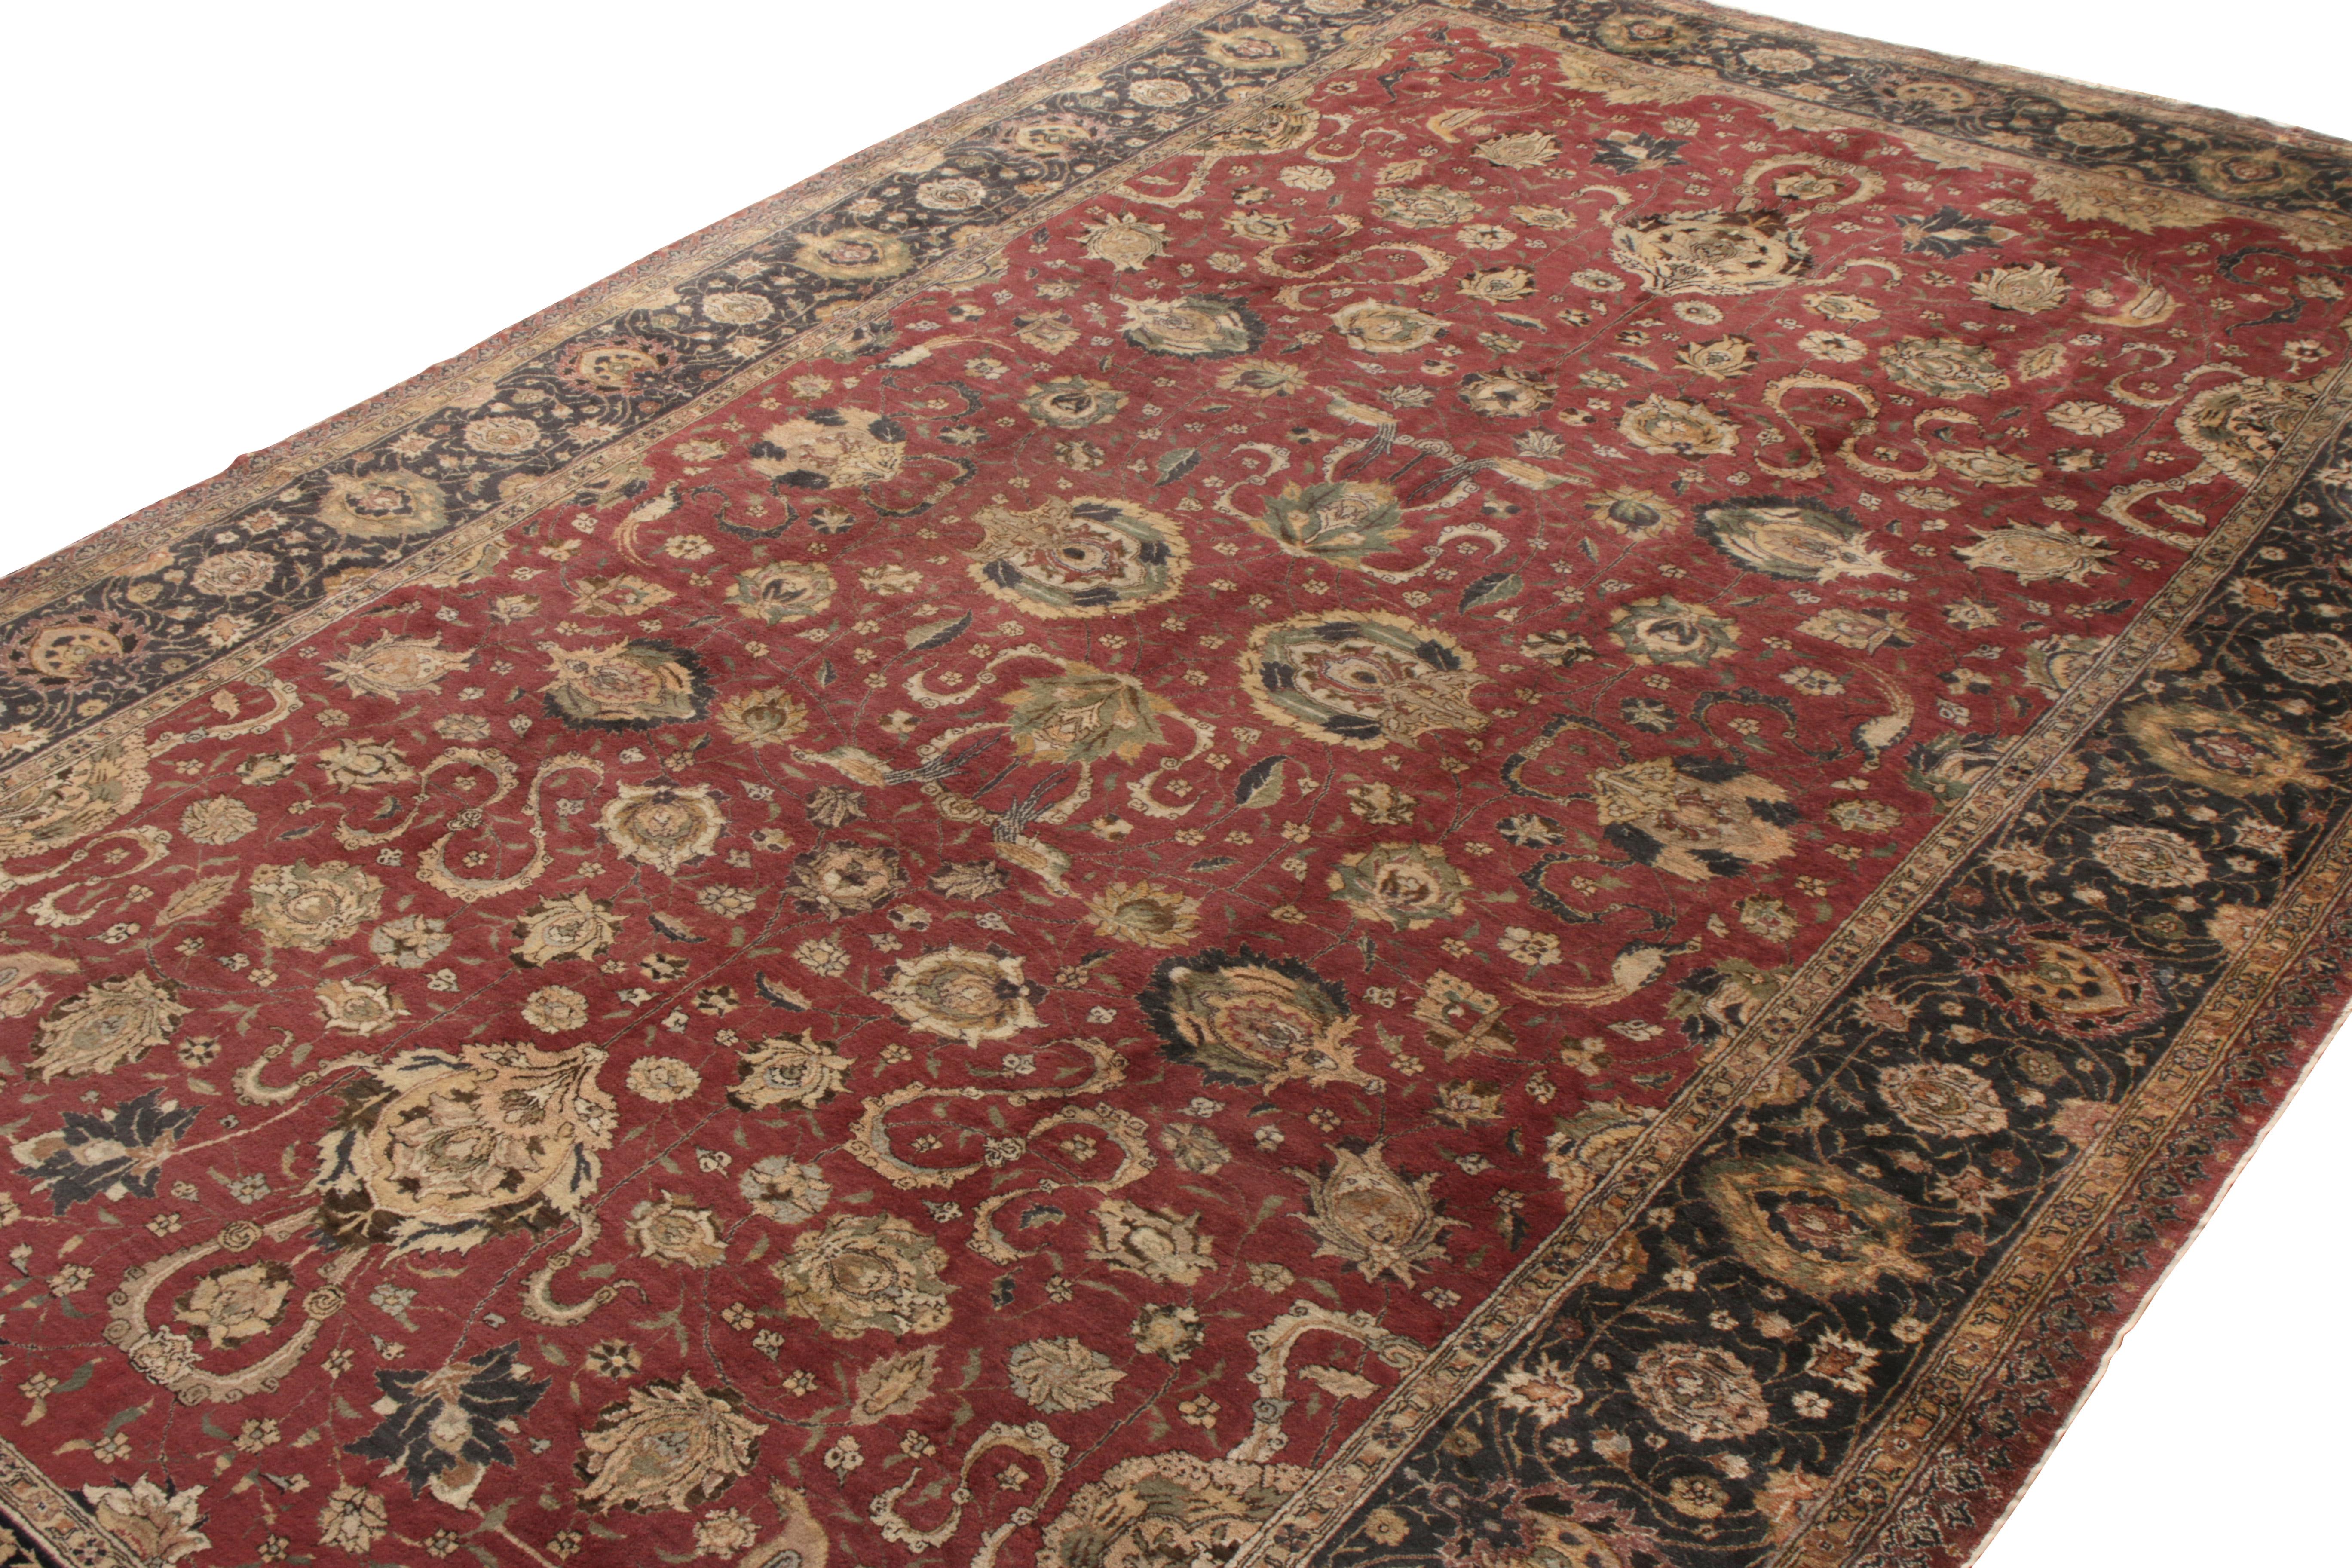 Turkish Hand-Knotted Antique Rug in Red, Beige-Brown Floral Pattern by Rug & Kilim For Sale